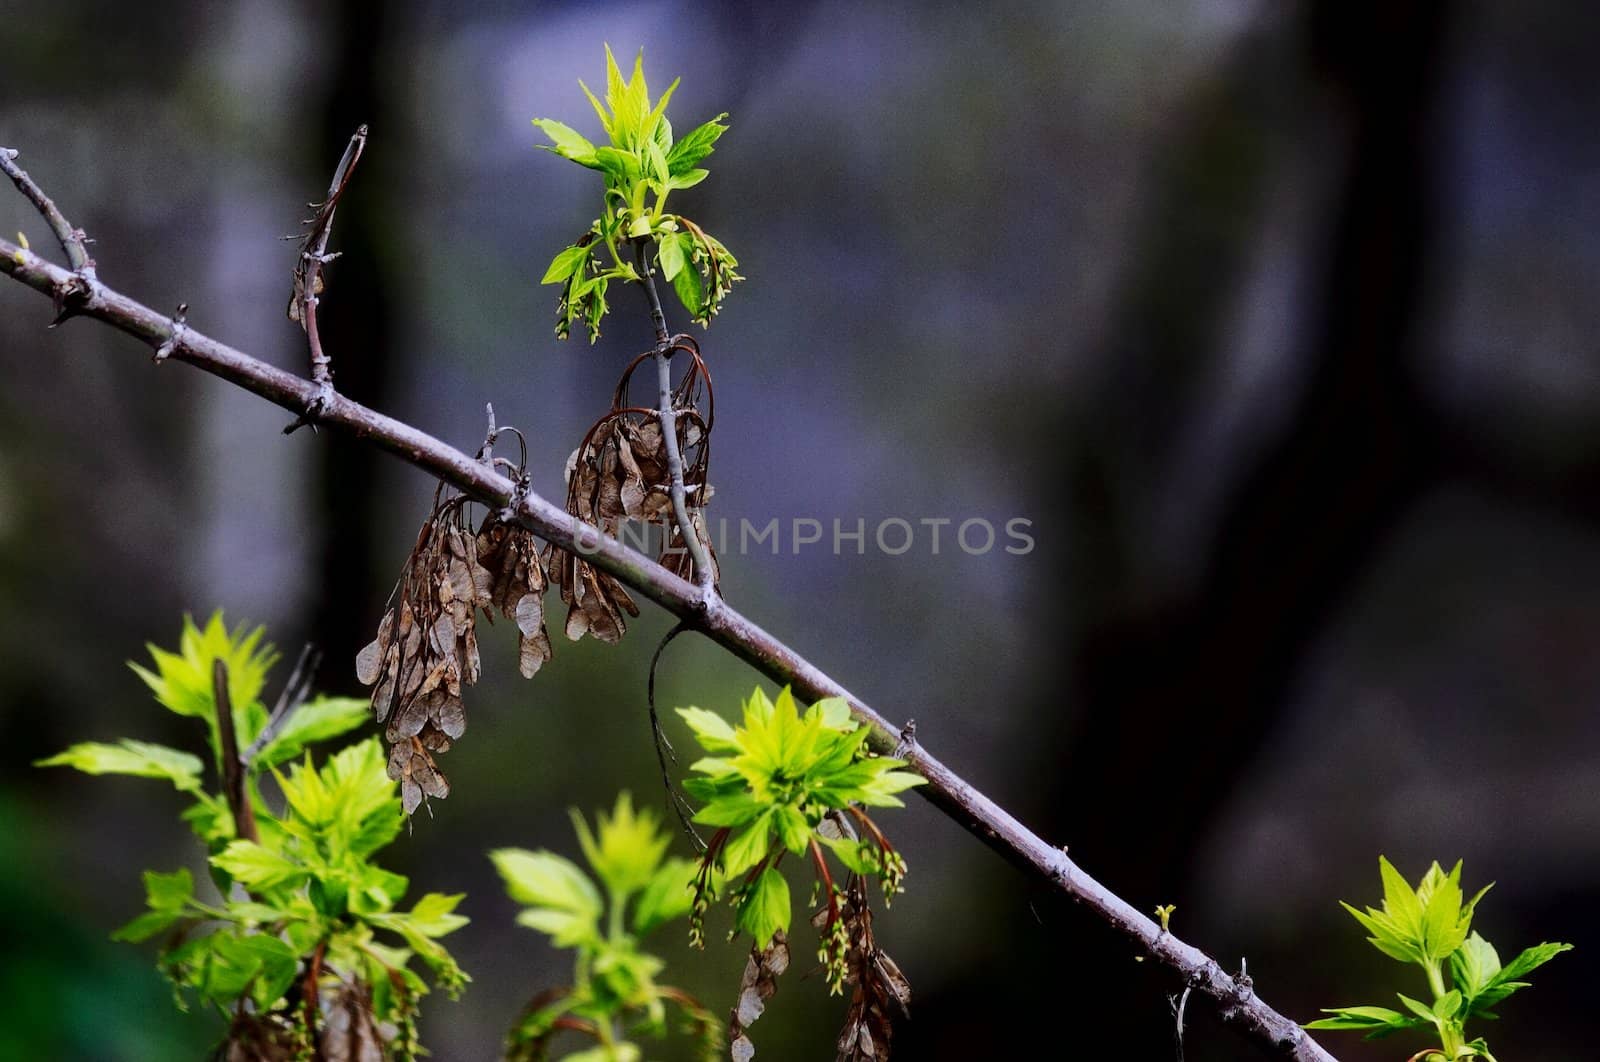 young leaves, flowers, spring